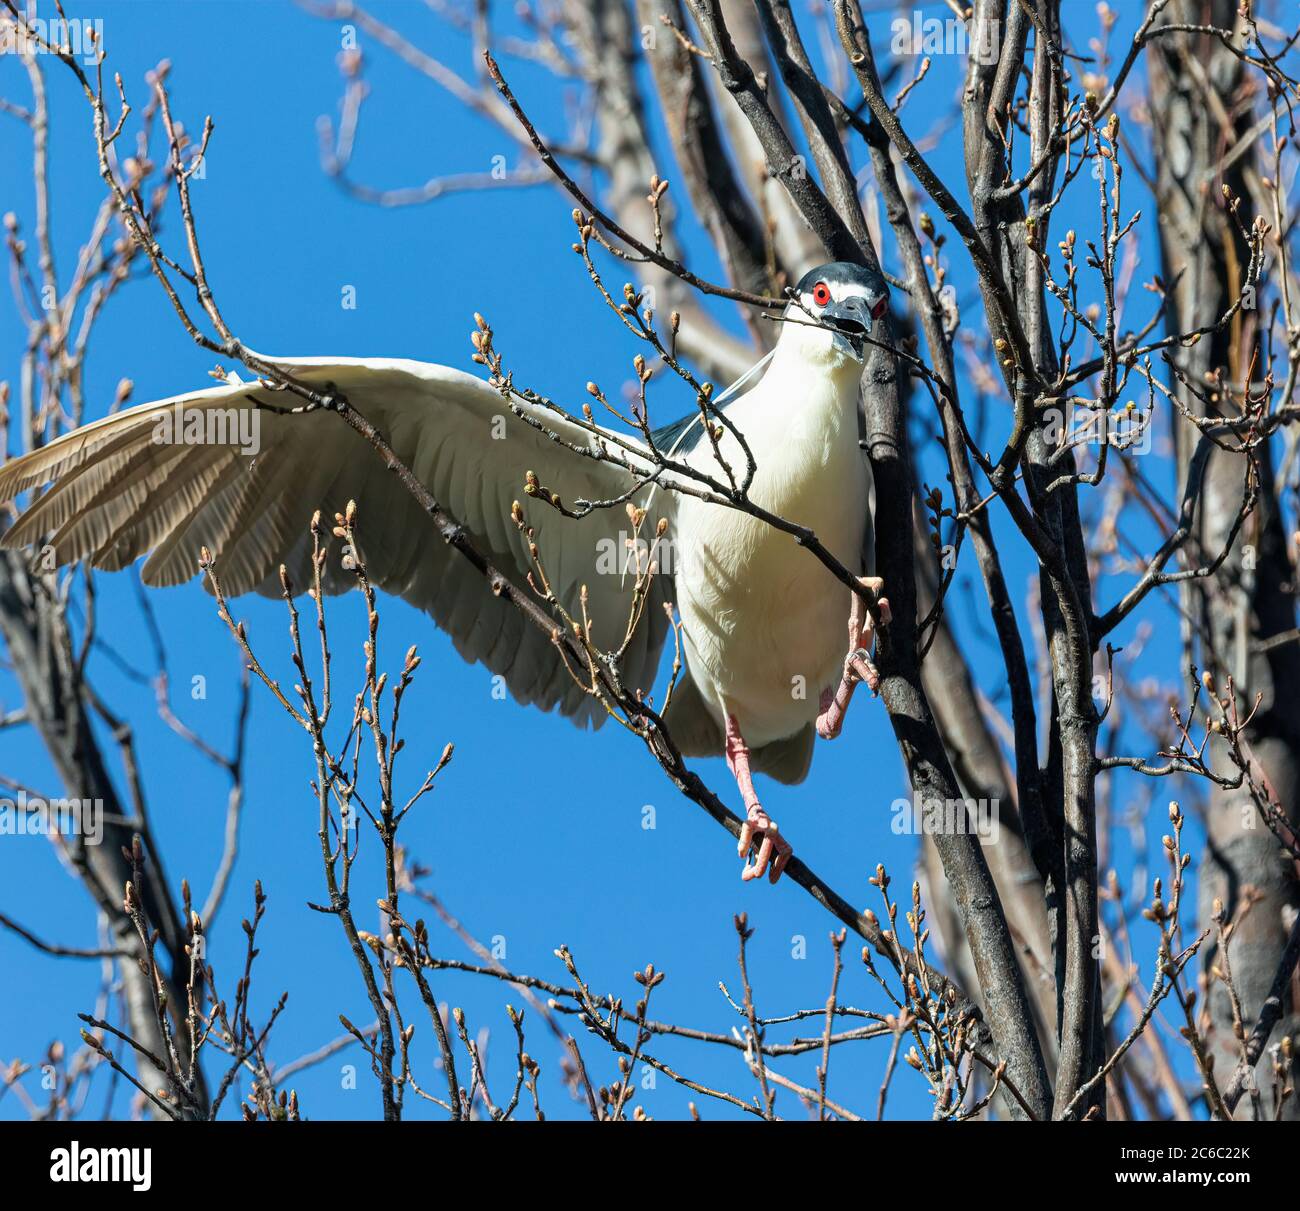 A breeding Black-crowned Night Heron balancing on separate branches with an open wing is ready to chomp down on a twig it will take to build its nest. Stock Photo